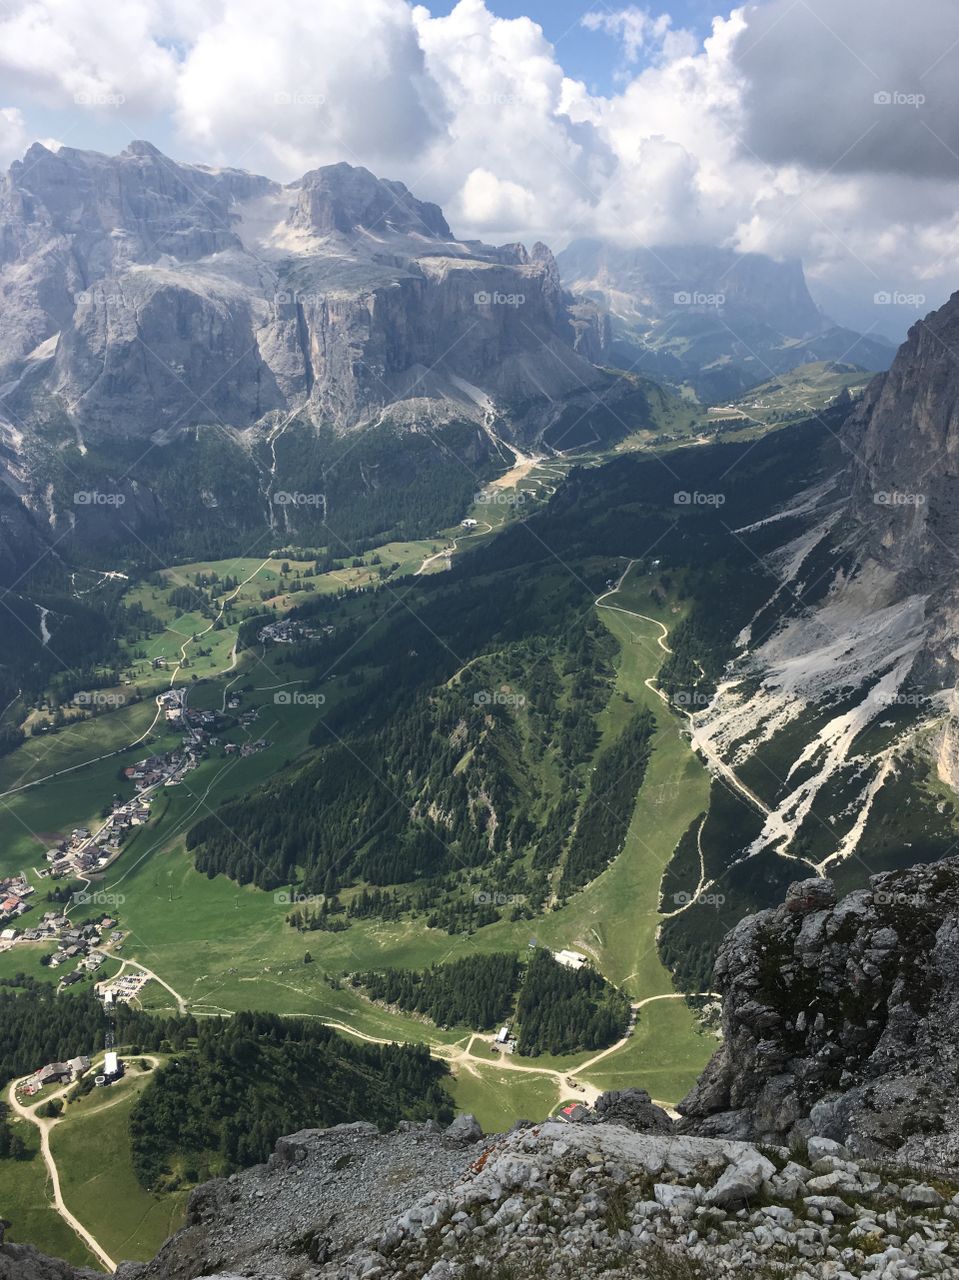 Colfosco’s view from the top - Sassongher, Italy 2018